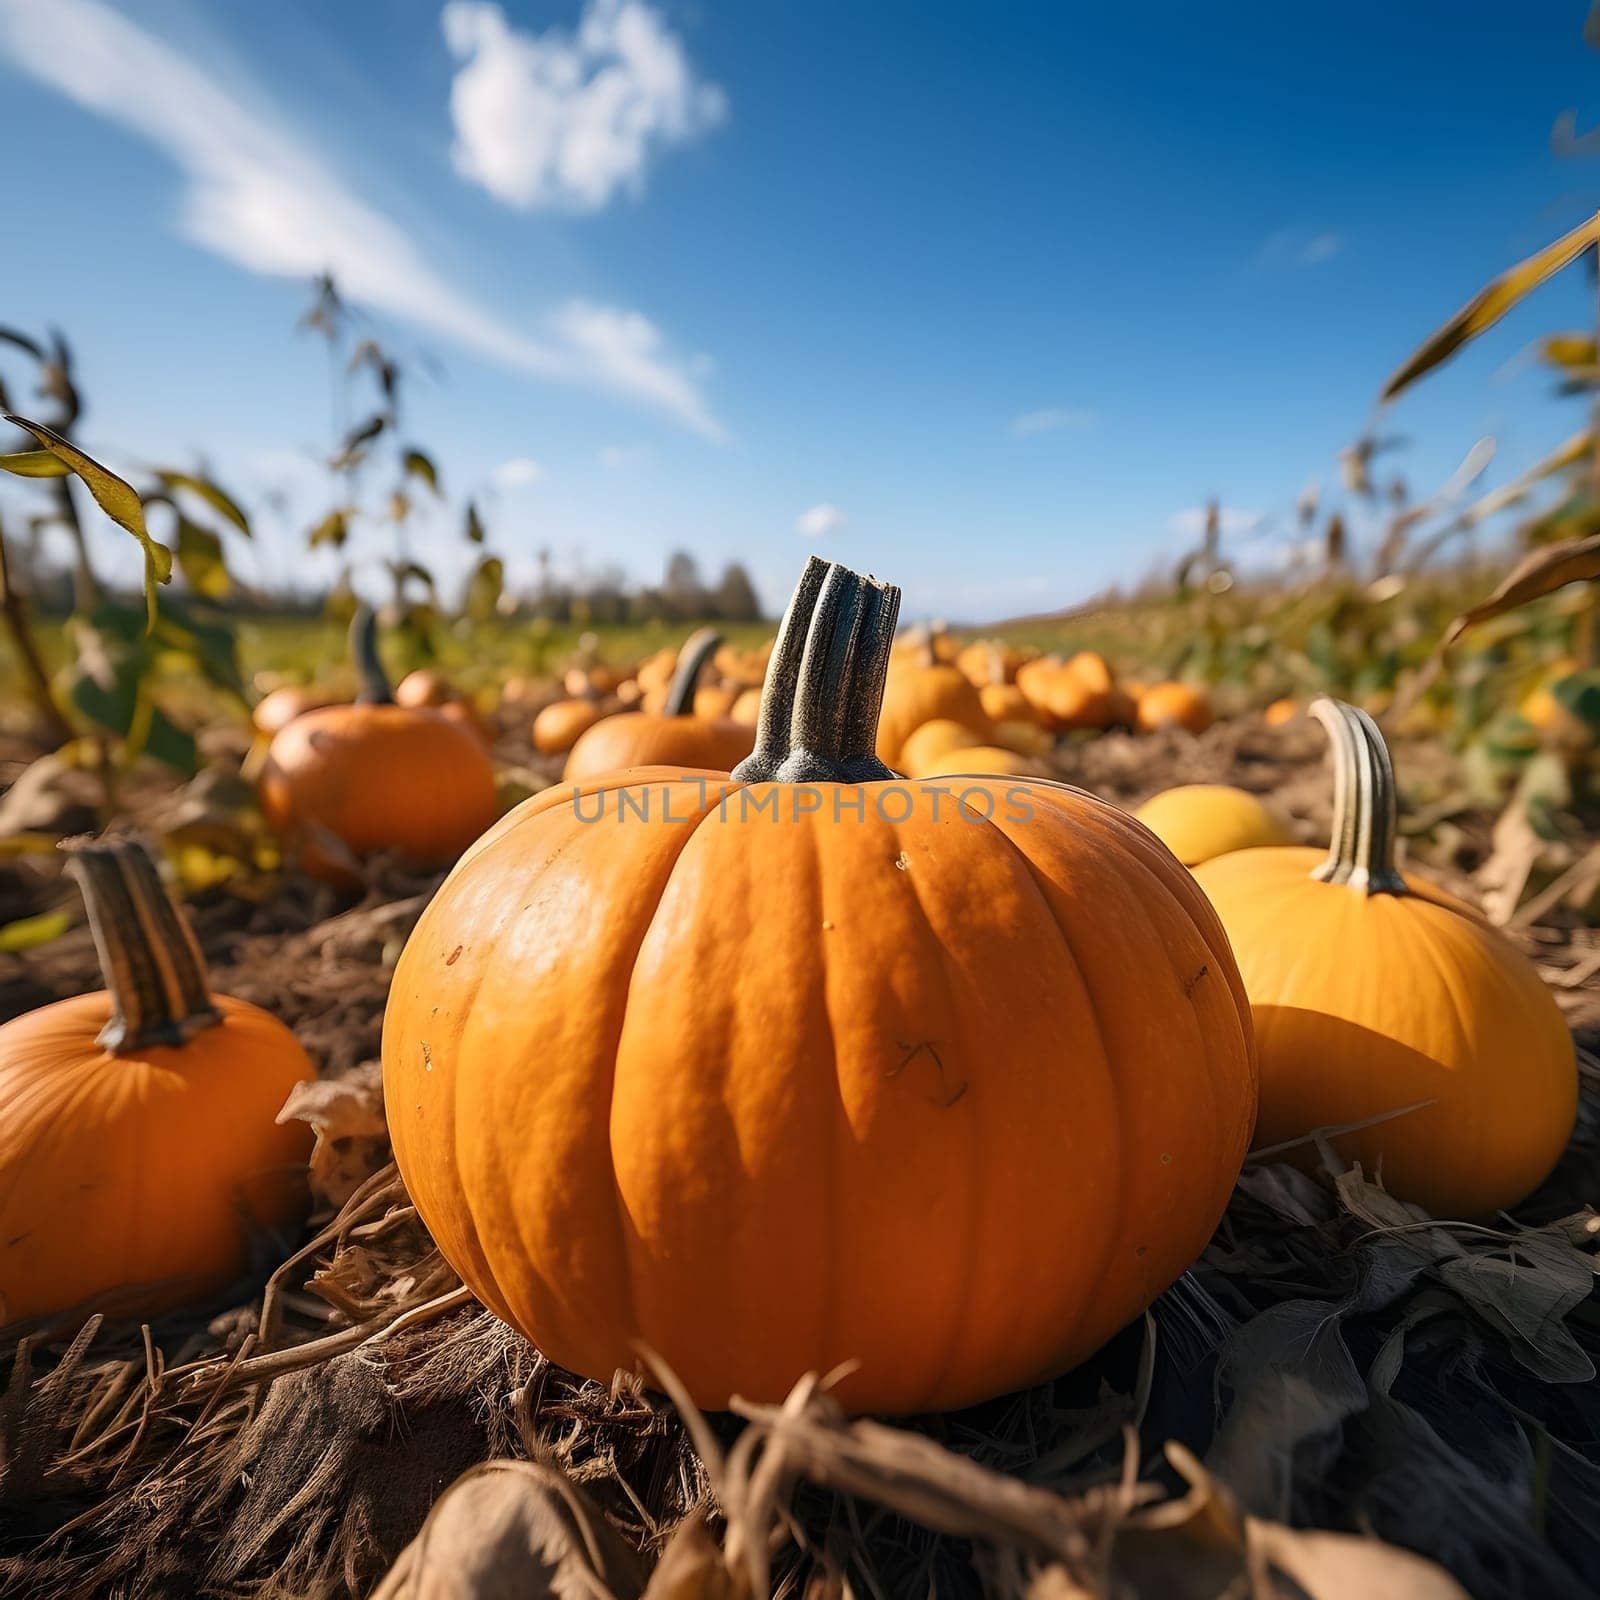 A close-up view of picked pumpkins in a pumpkin field. Pumpkin as a dish of thanksgiving for the harvest. An atmosphere of joy and celebration.